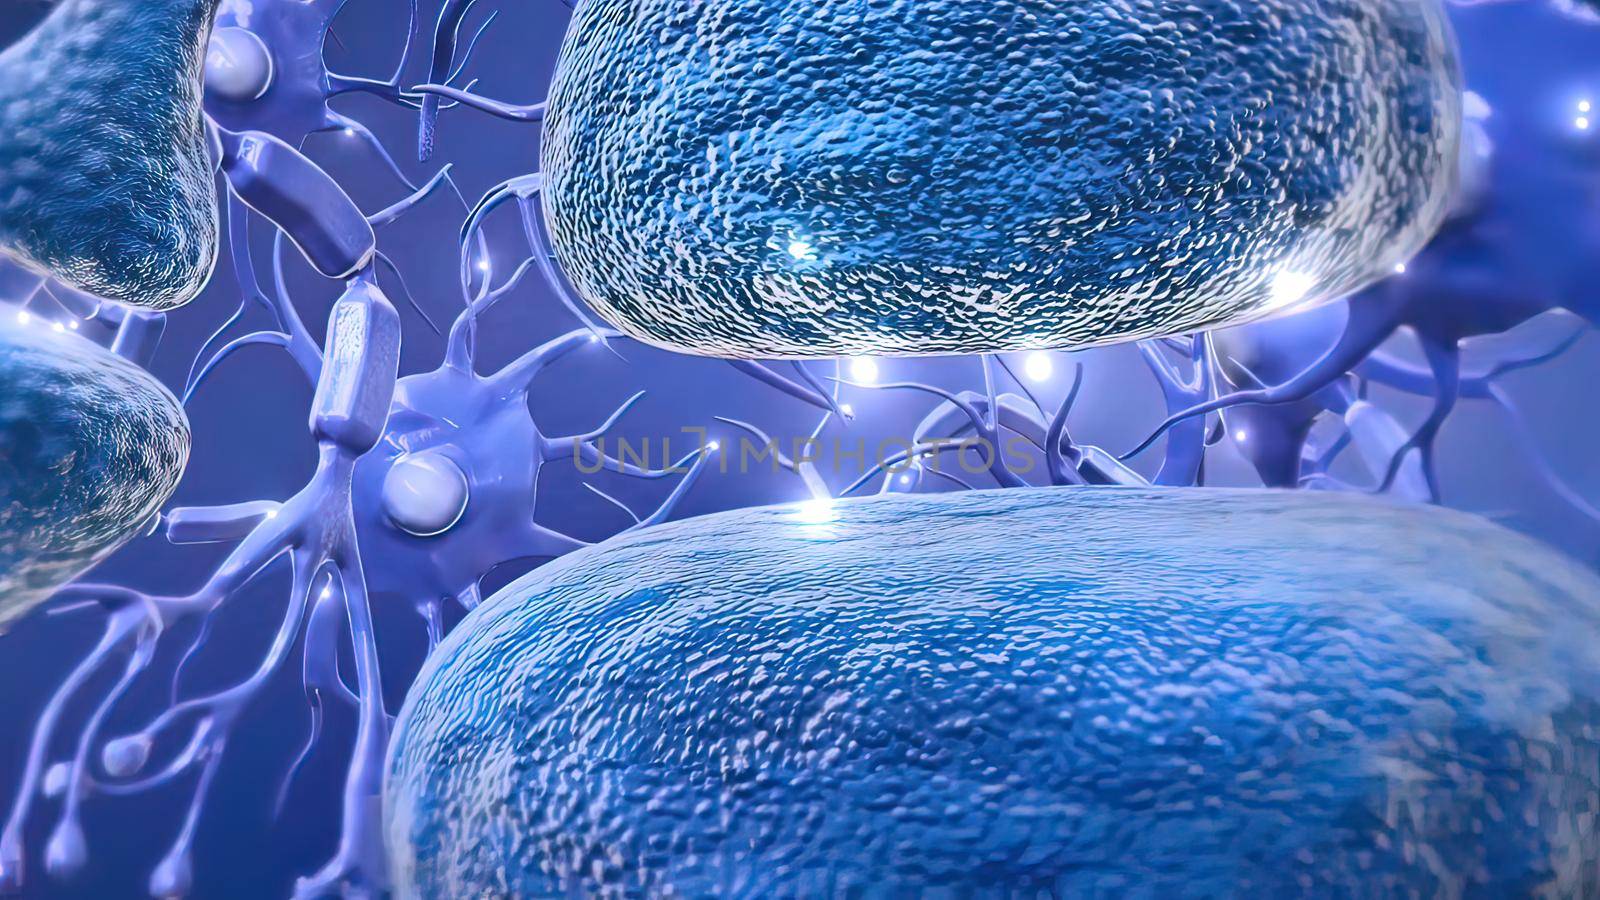 Neurons are the fundamental units of the brain and nervous system 3D illustration